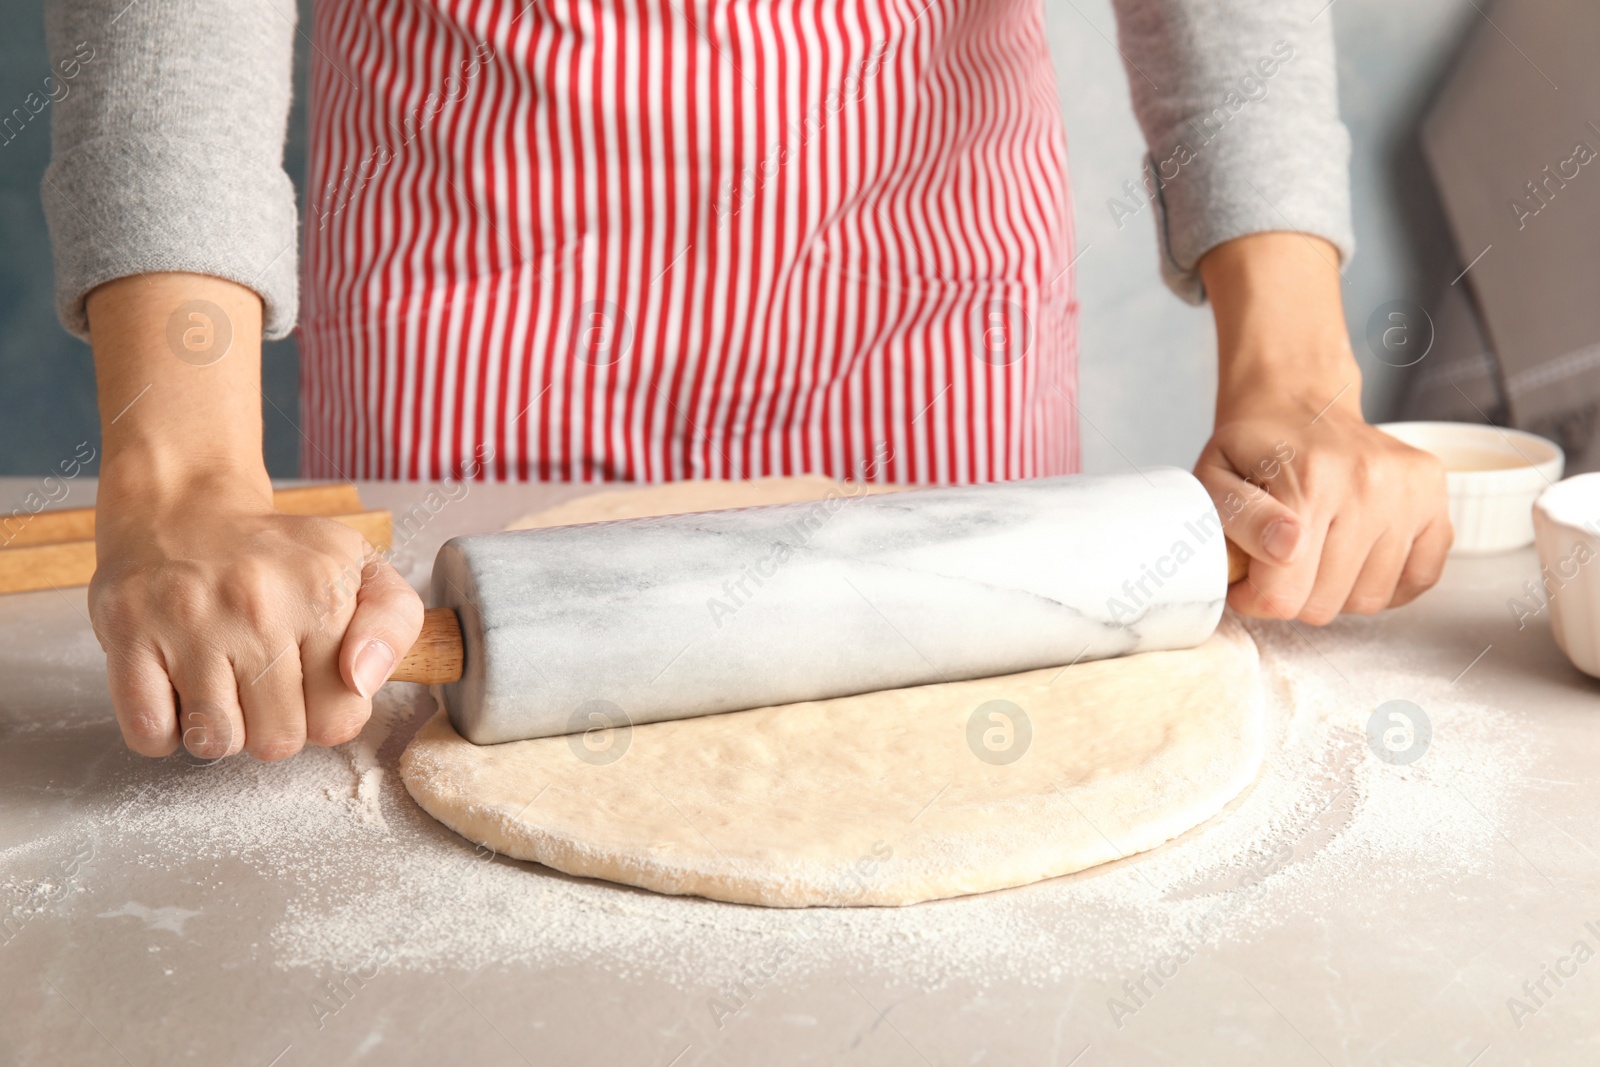 Photo of Woman rolling dough for cinnamon rolls on table, closeup